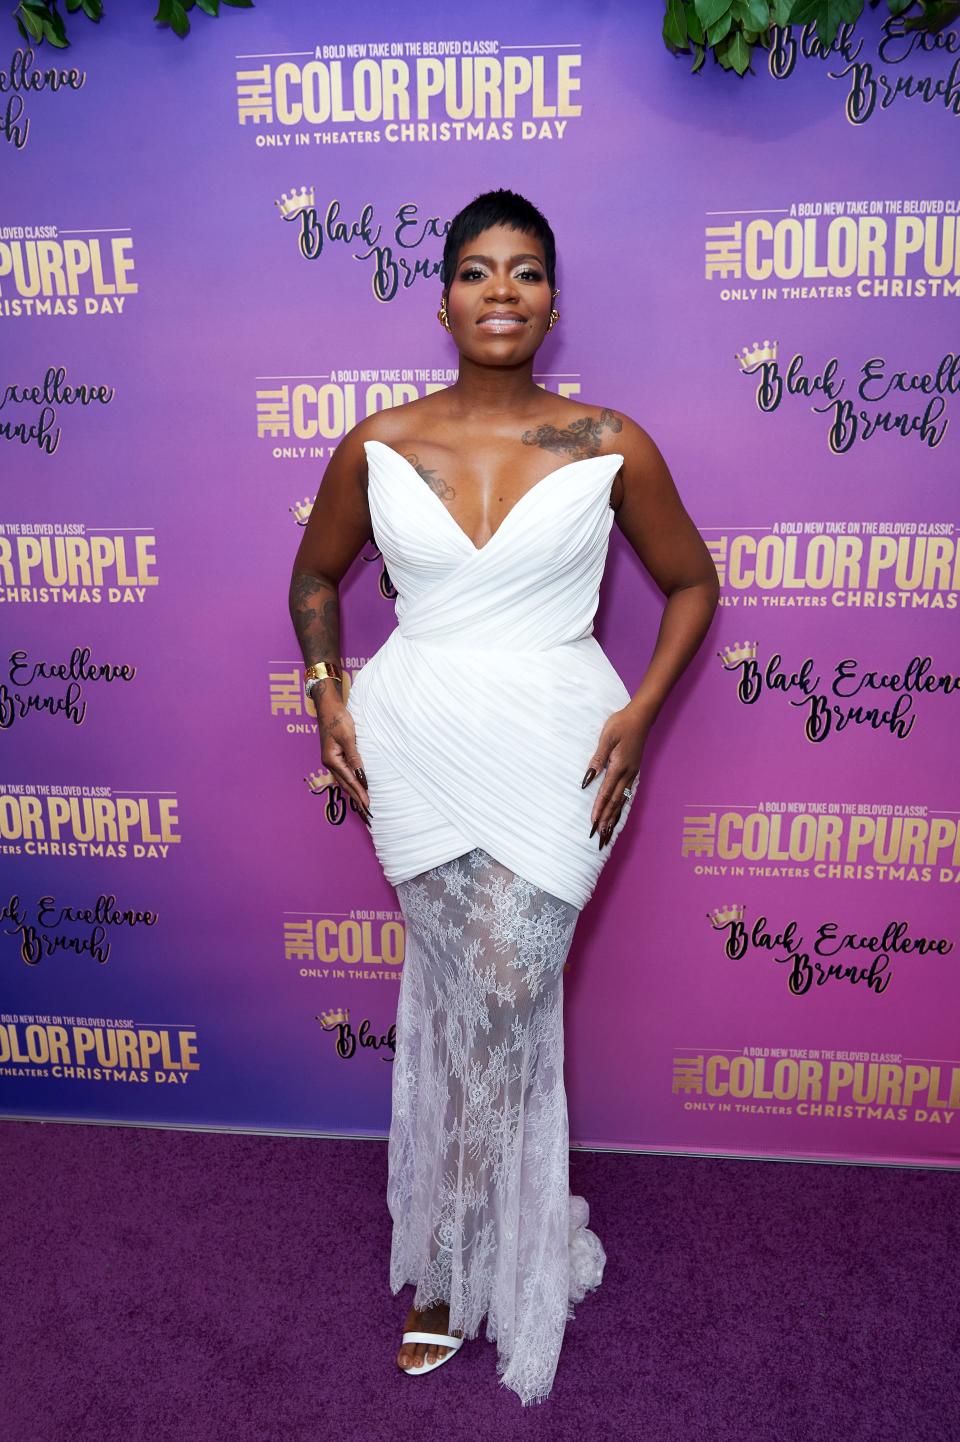 Fantasia attends the Black Excellence Brunch Celebrates "The Color Purple" in December 2023.